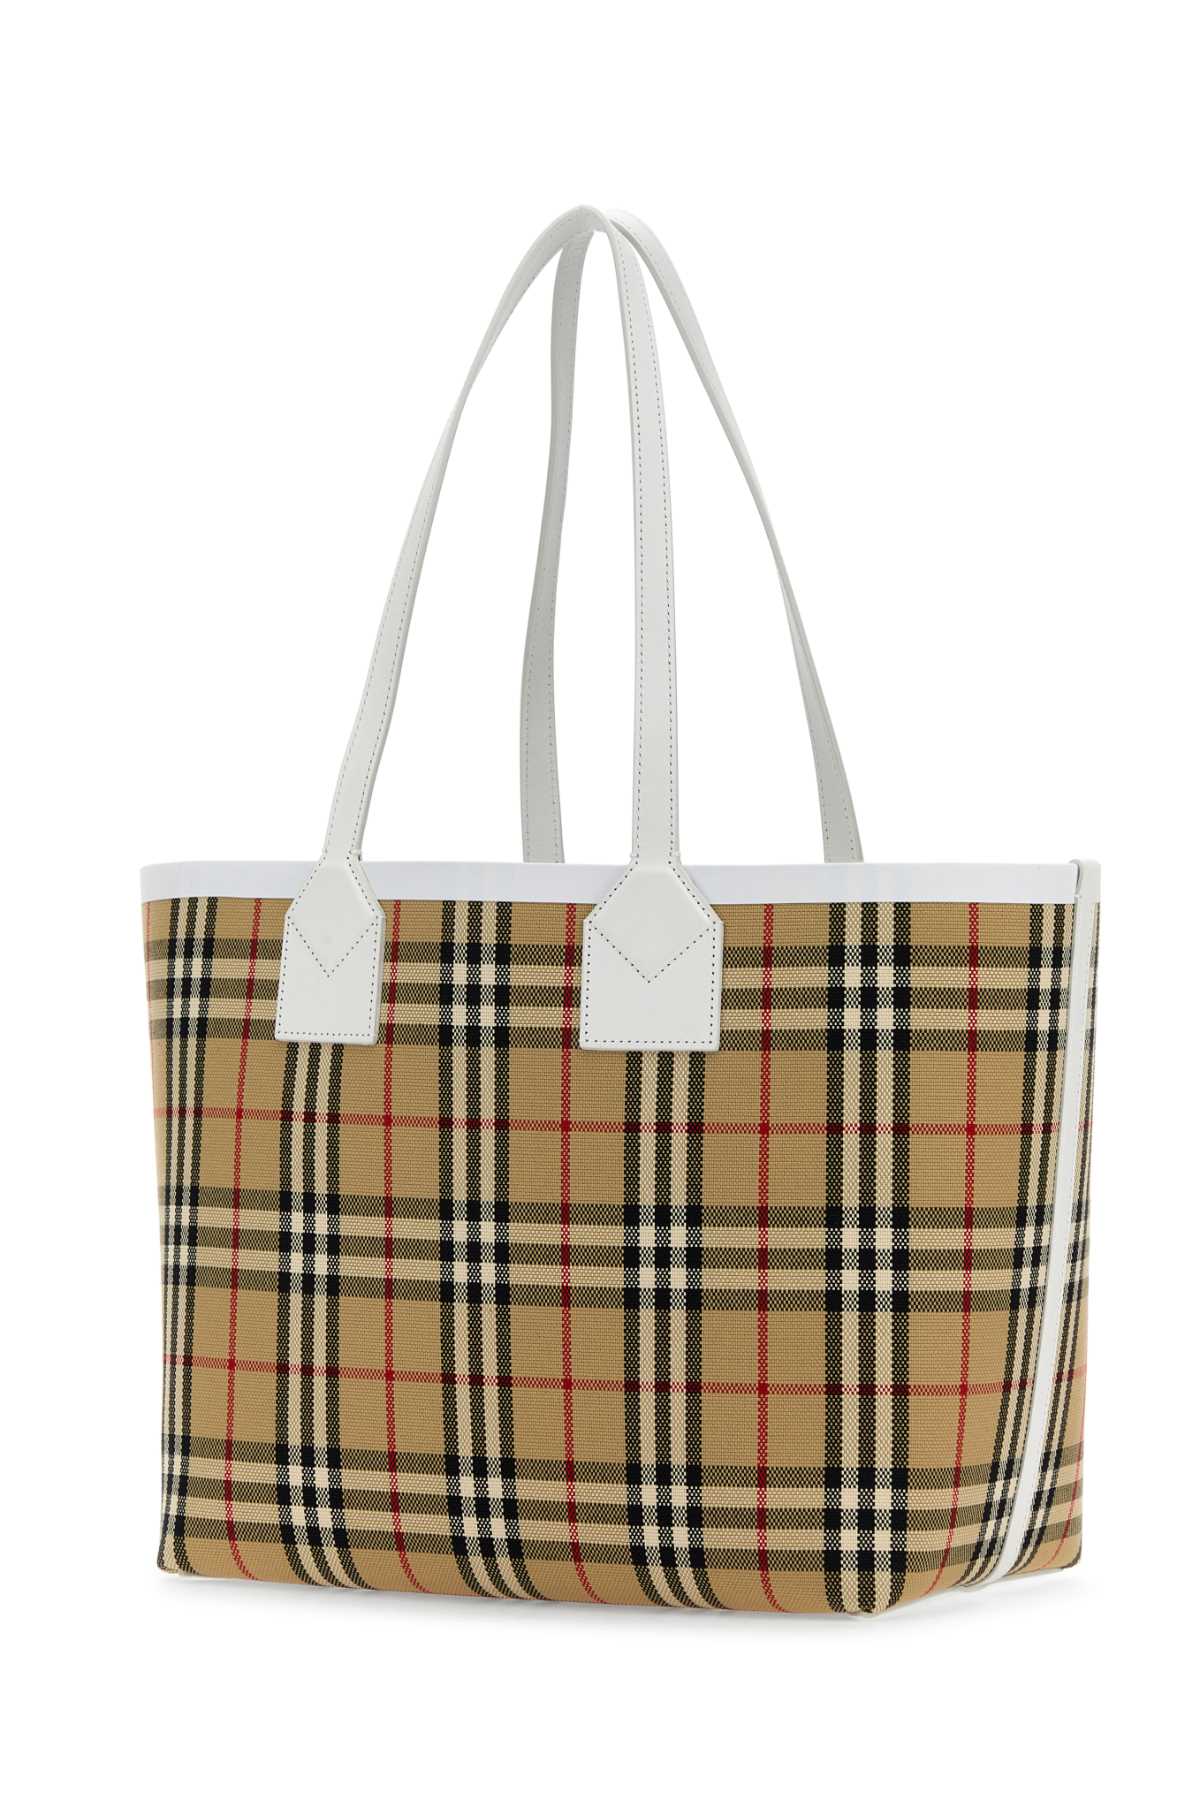 Burberry Embroidered Canvas London Shopping Bag In Vintagecheckwhite